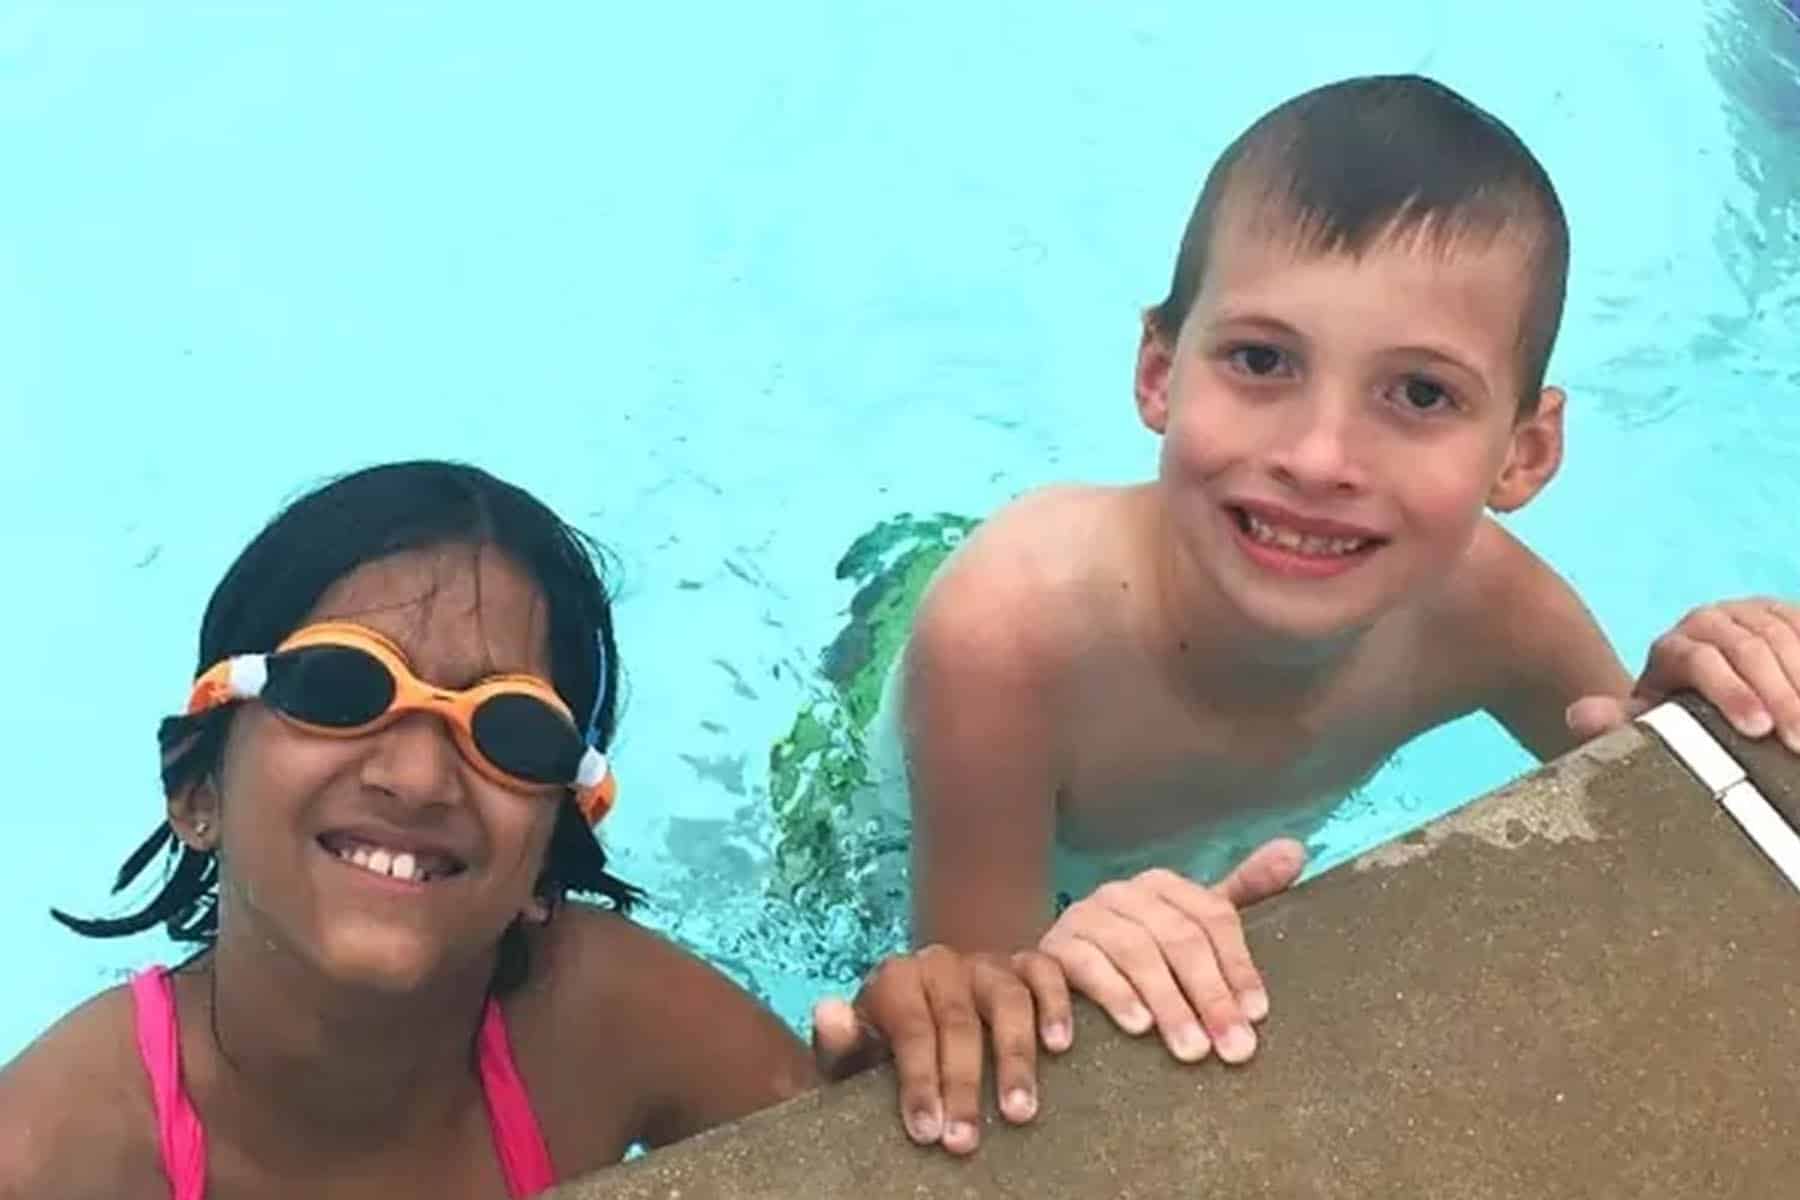 Just keep swimming: Swim tips for children who are deaf or hard of hearing